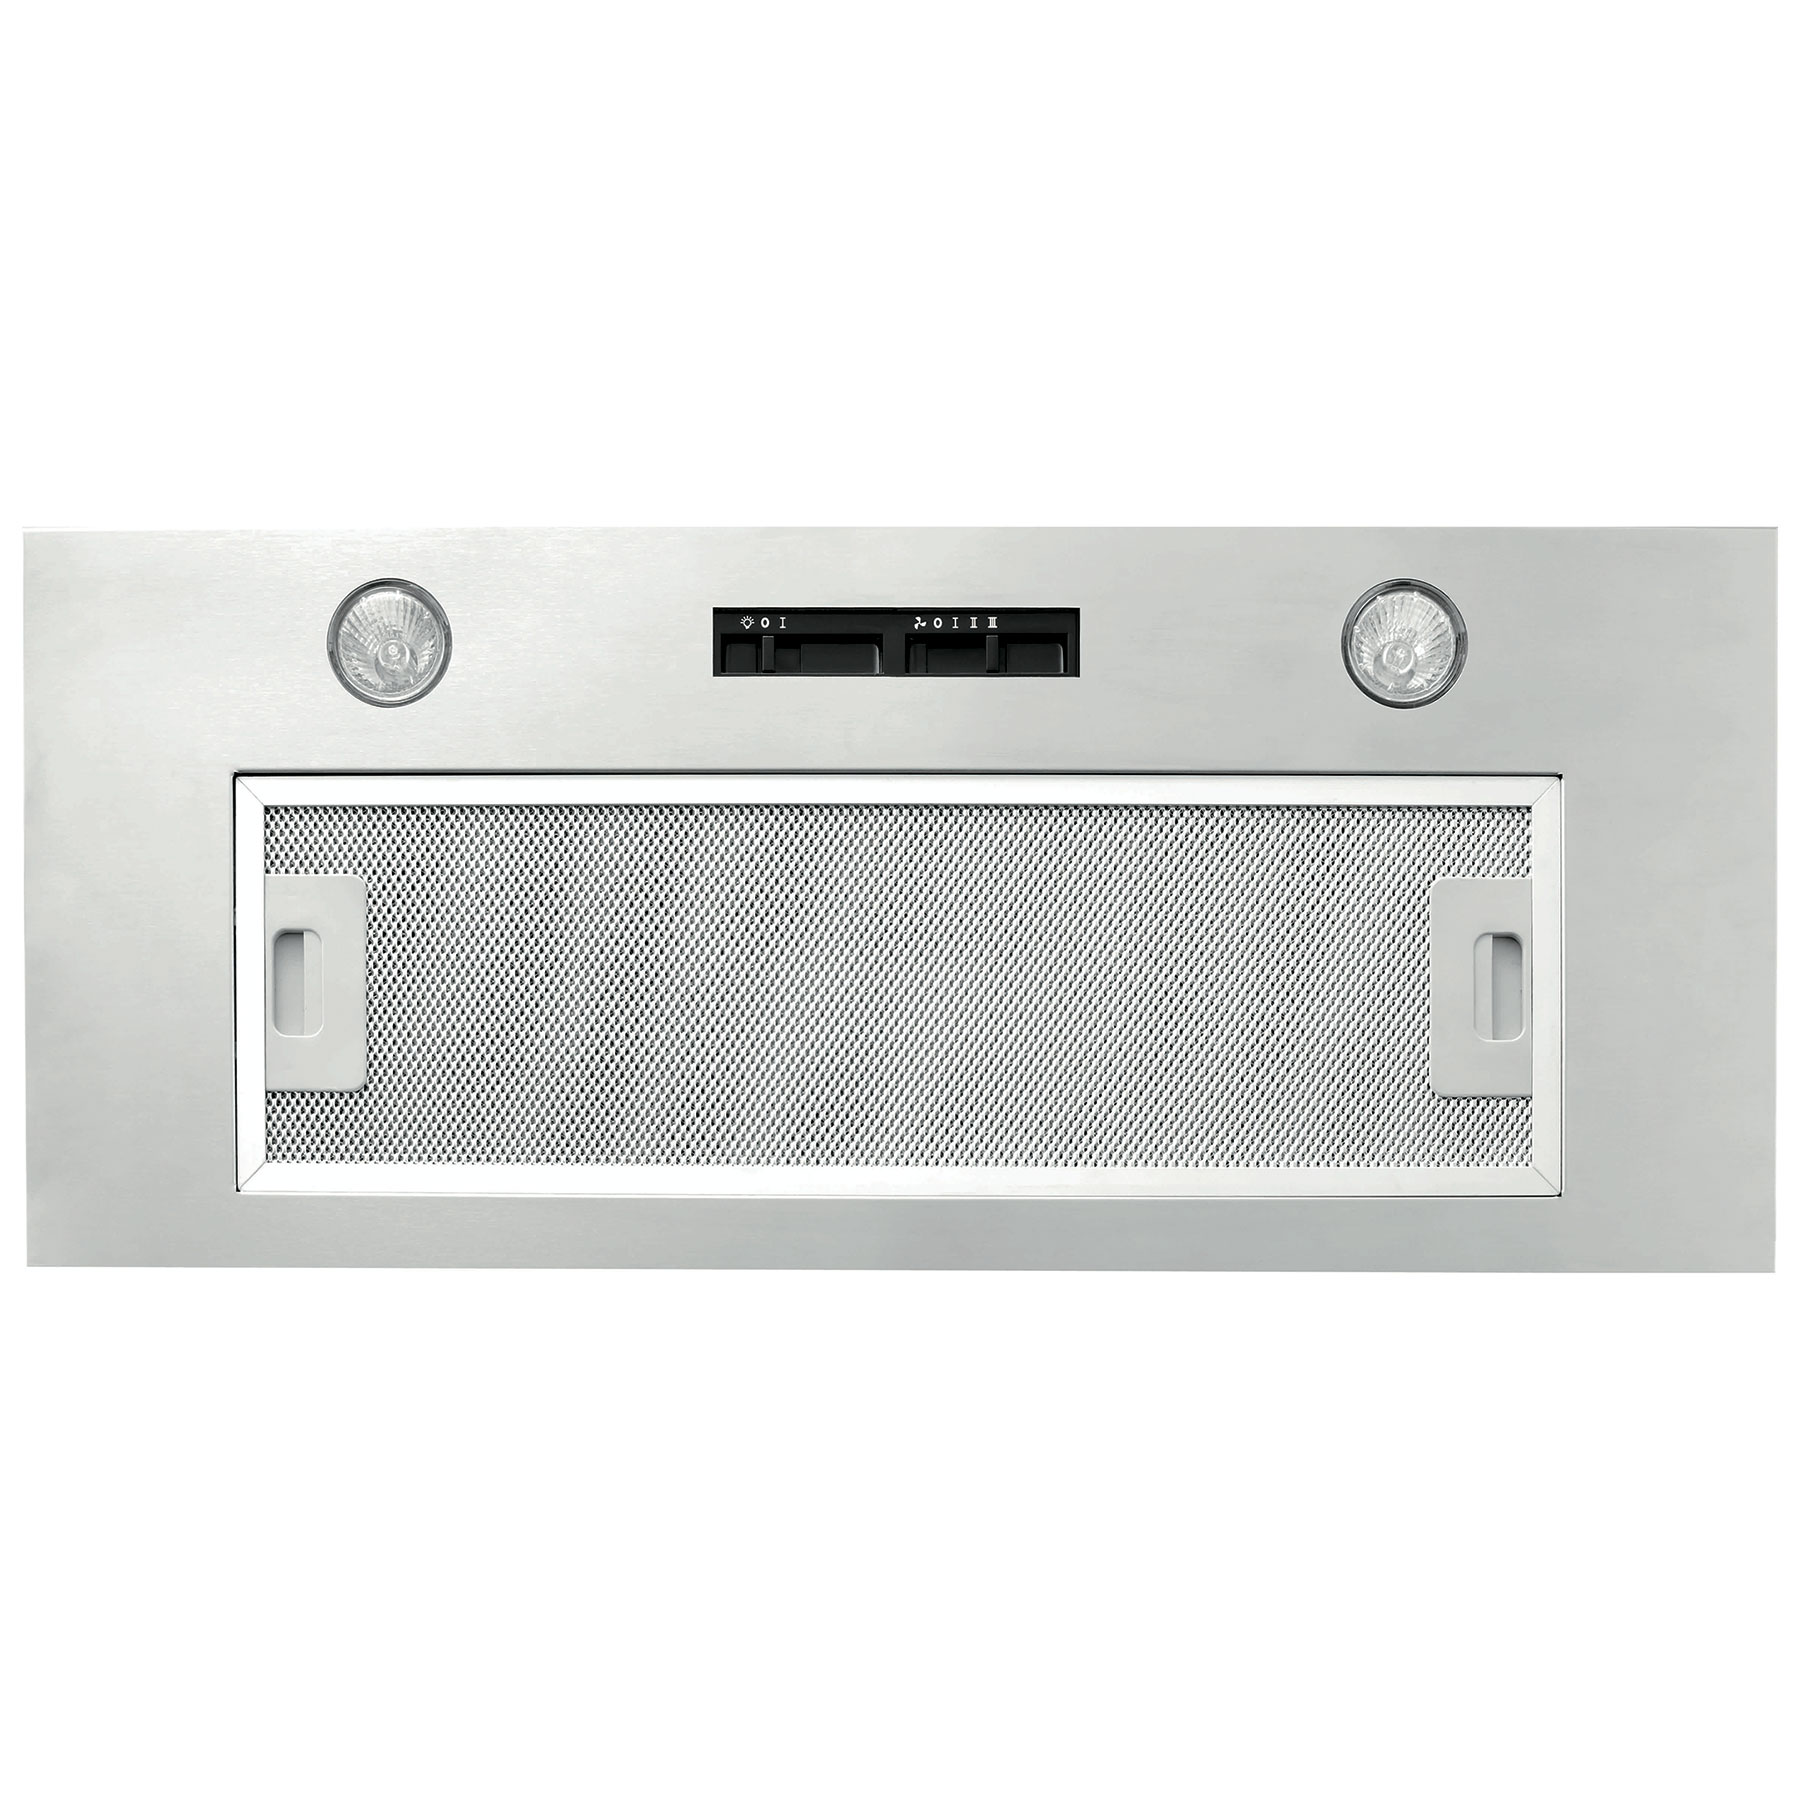 Image of Culina UBCAN52SV 1 52cm Canopy Extractor Hood in Silver 3 Speed Fan